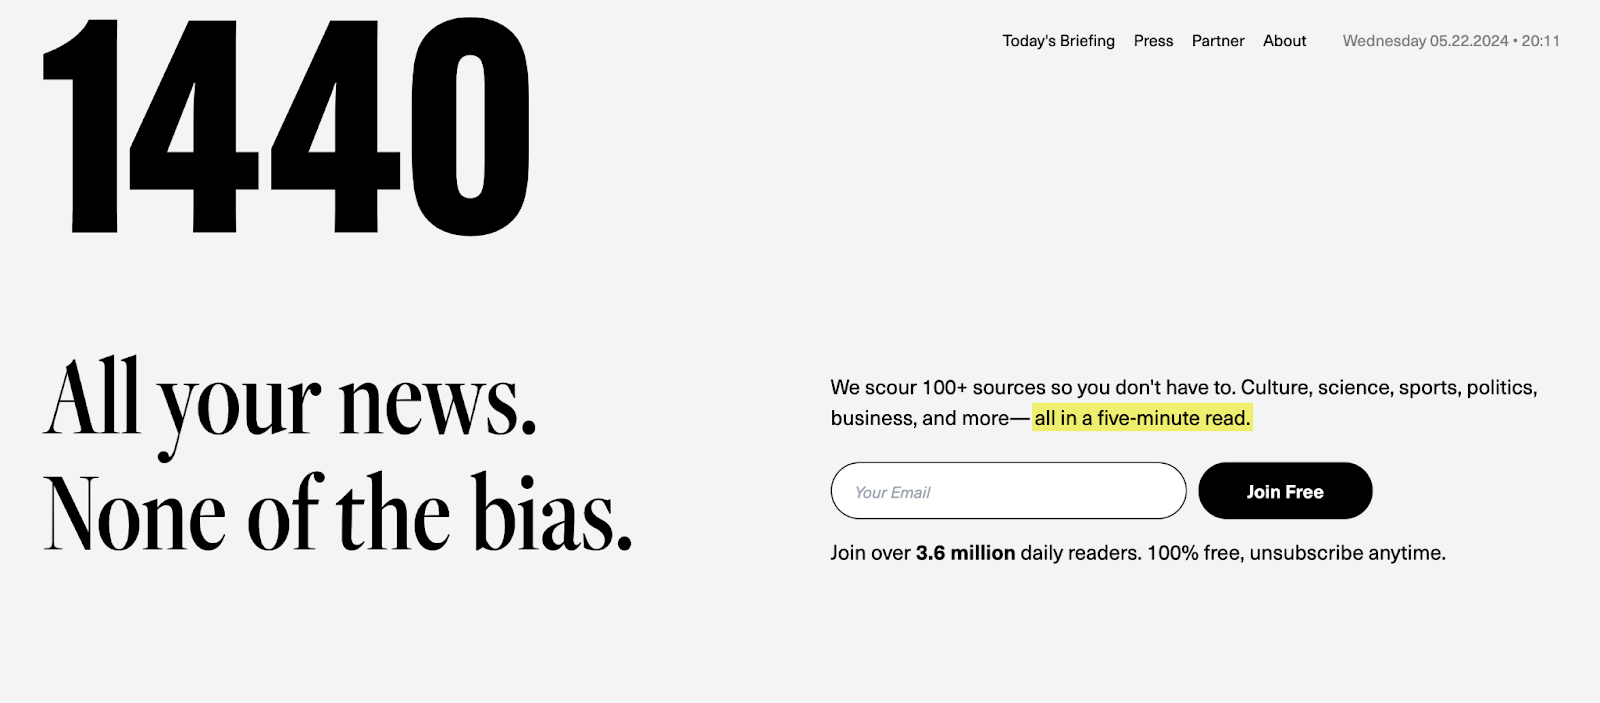 1440. All your news.  No one is biased.  We scour 100+ sources so you don't have to.  Culture, science, sports, politics, business, and more - all read in five minutes. 